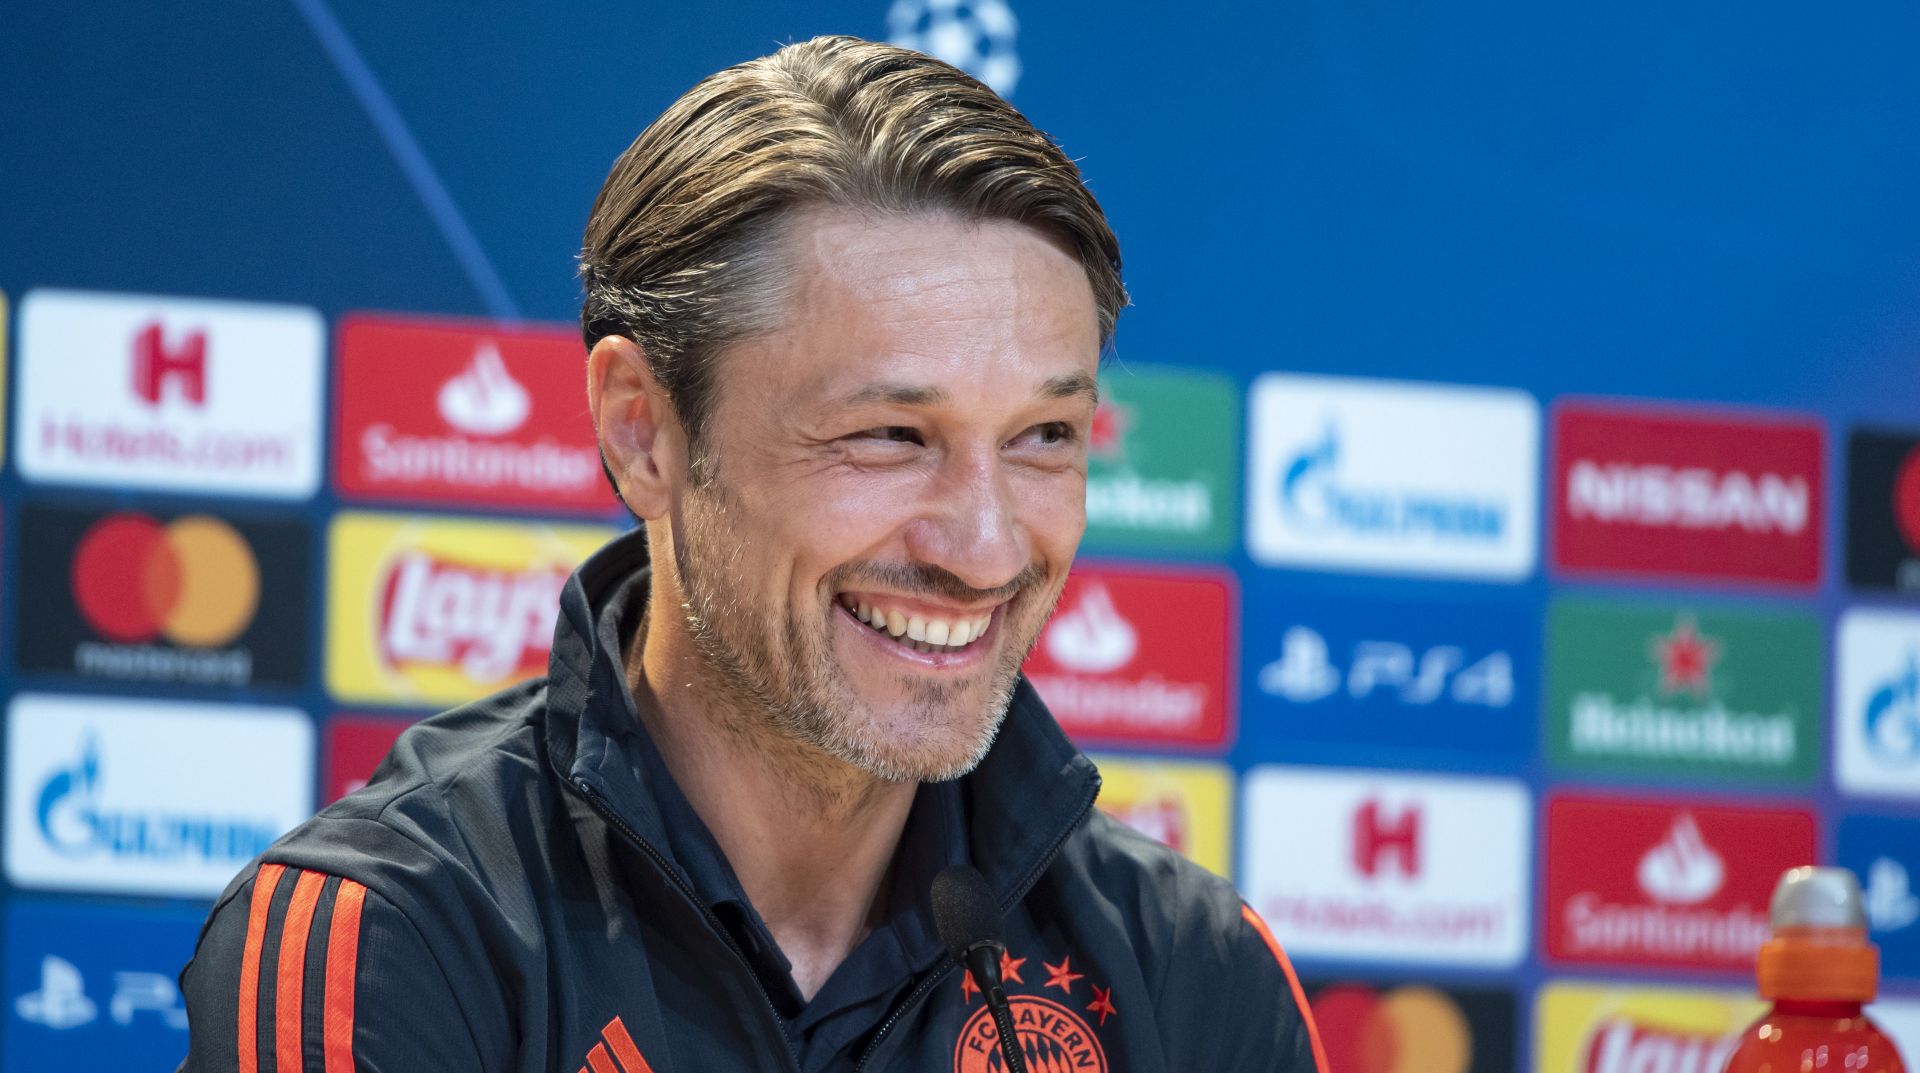 epa07848548 Bayern Munich's head coach Niko Kovac smiles during a press conference in Munich, Germany, 17 September 2019. Bayern Munich will face Red Star Belgrade in their UEFA Champions League group B soccer match on 18 September 2019.  EPA/LUKAS BARTH-TUTTAS